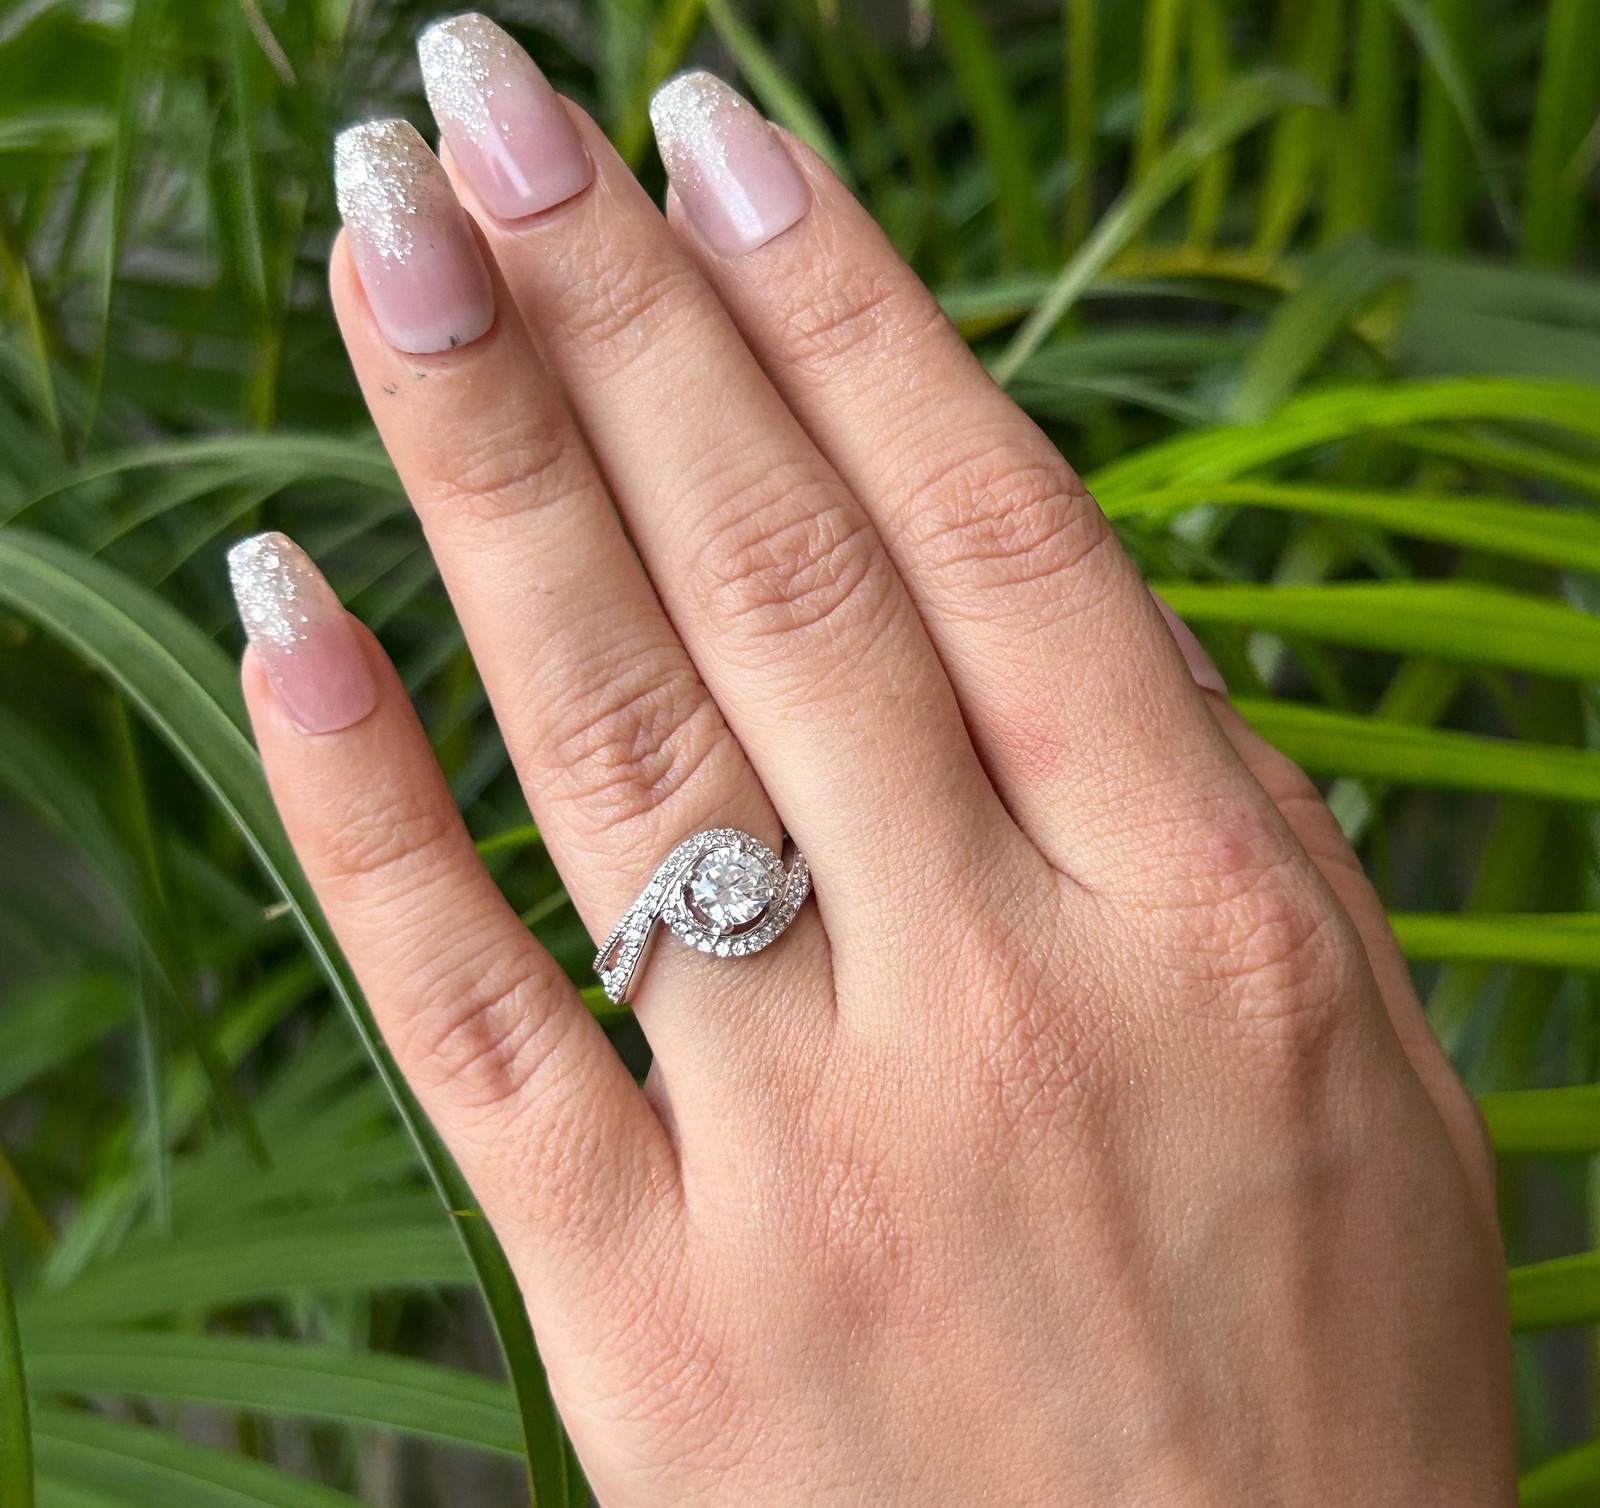 Vs sterling silver cocktail ring 131